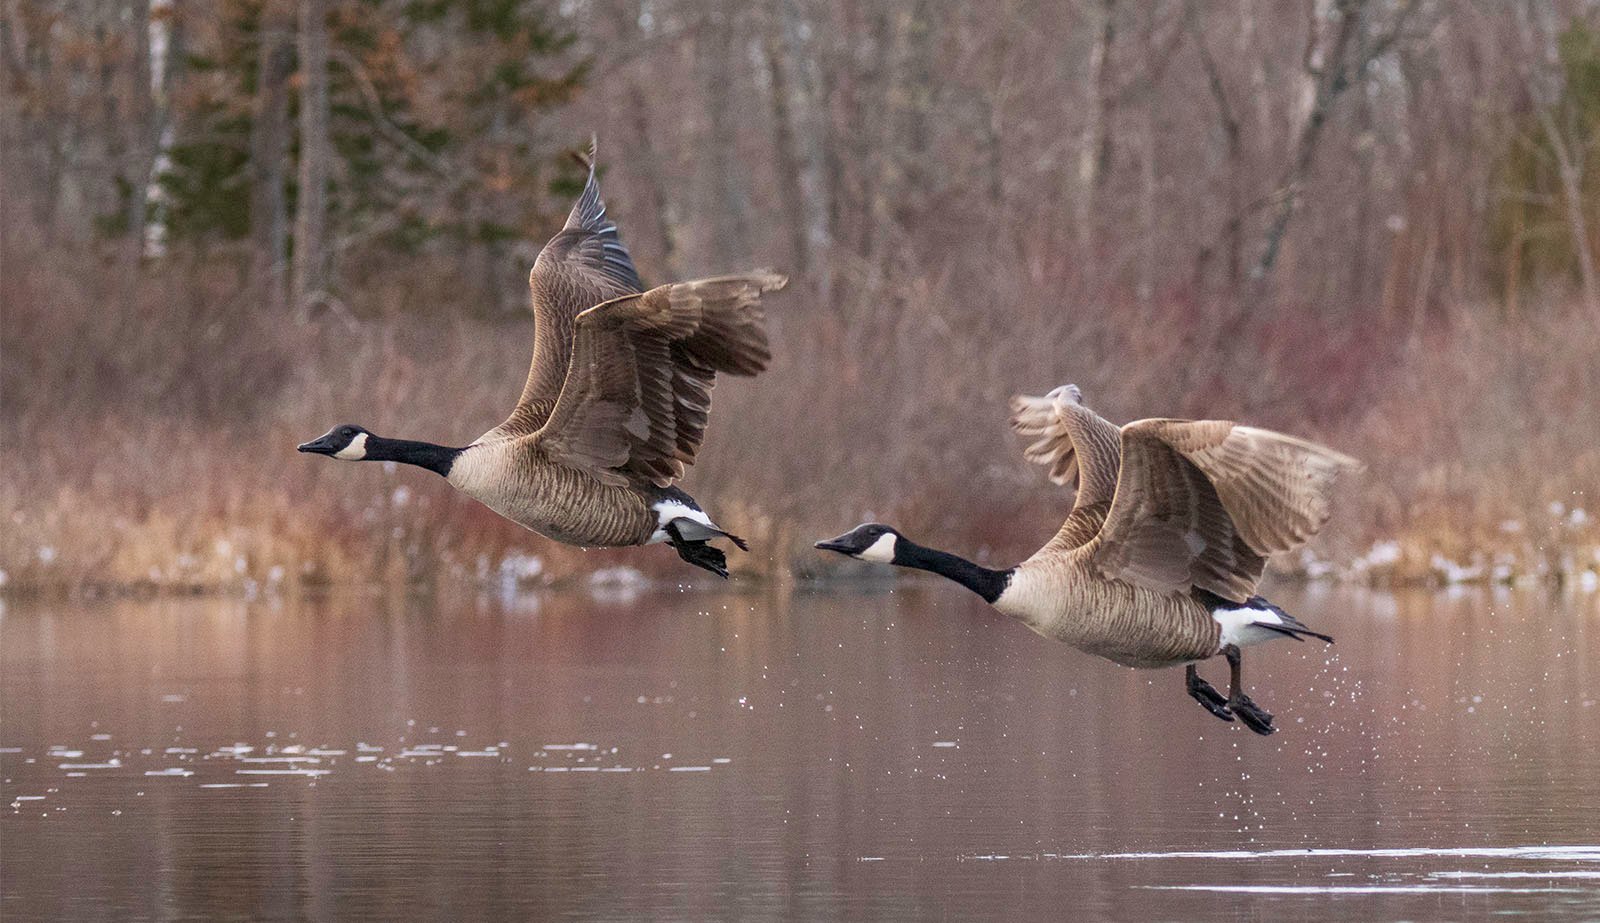 Two Canada geese fly over the lake, one slightly ahead of the other. Both are in mid-beat, wings raised, with trees and reeds in the background.